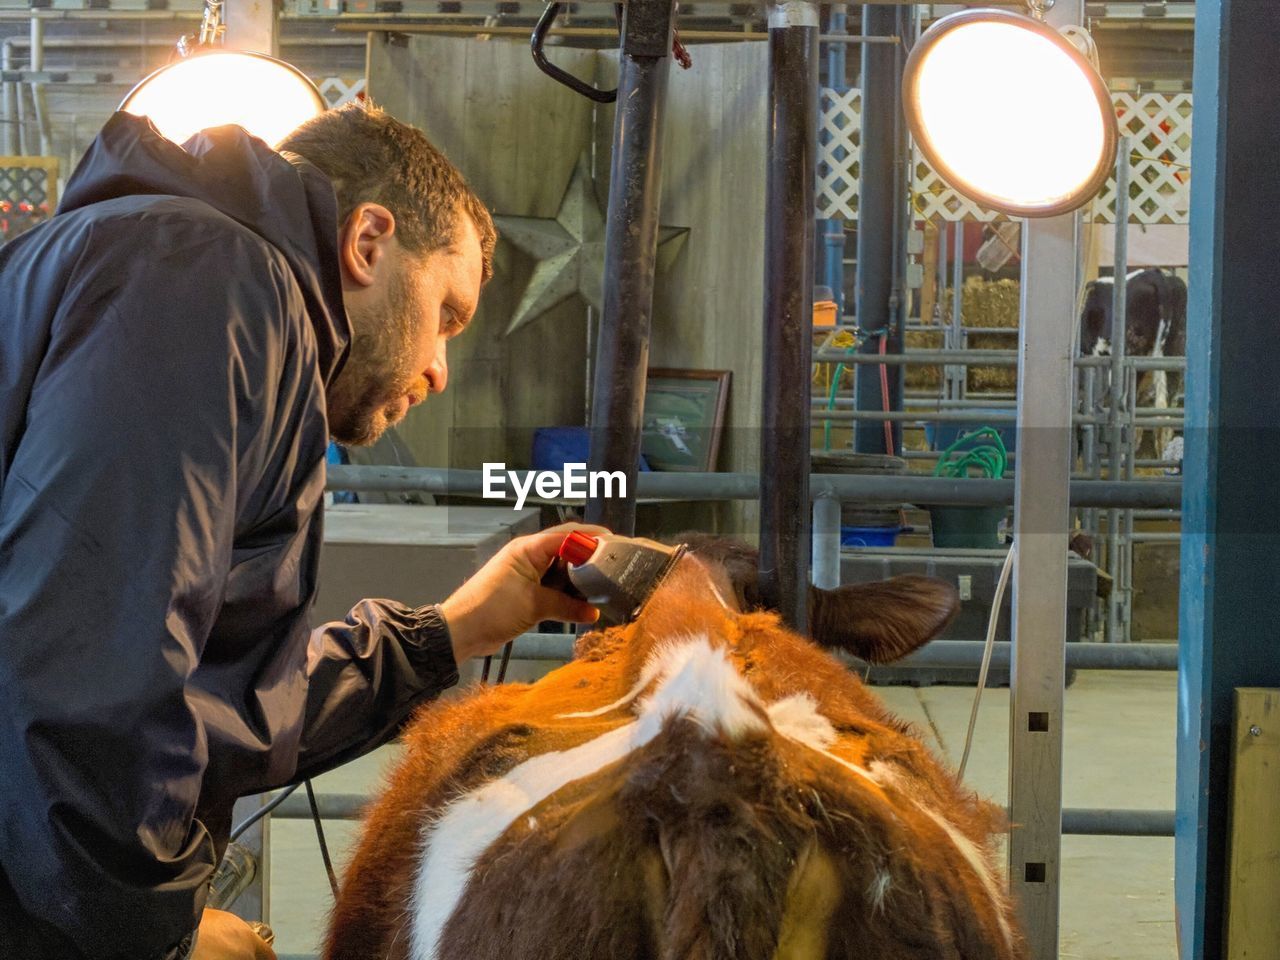 Man cutting hair of cow by illuminated lights in room